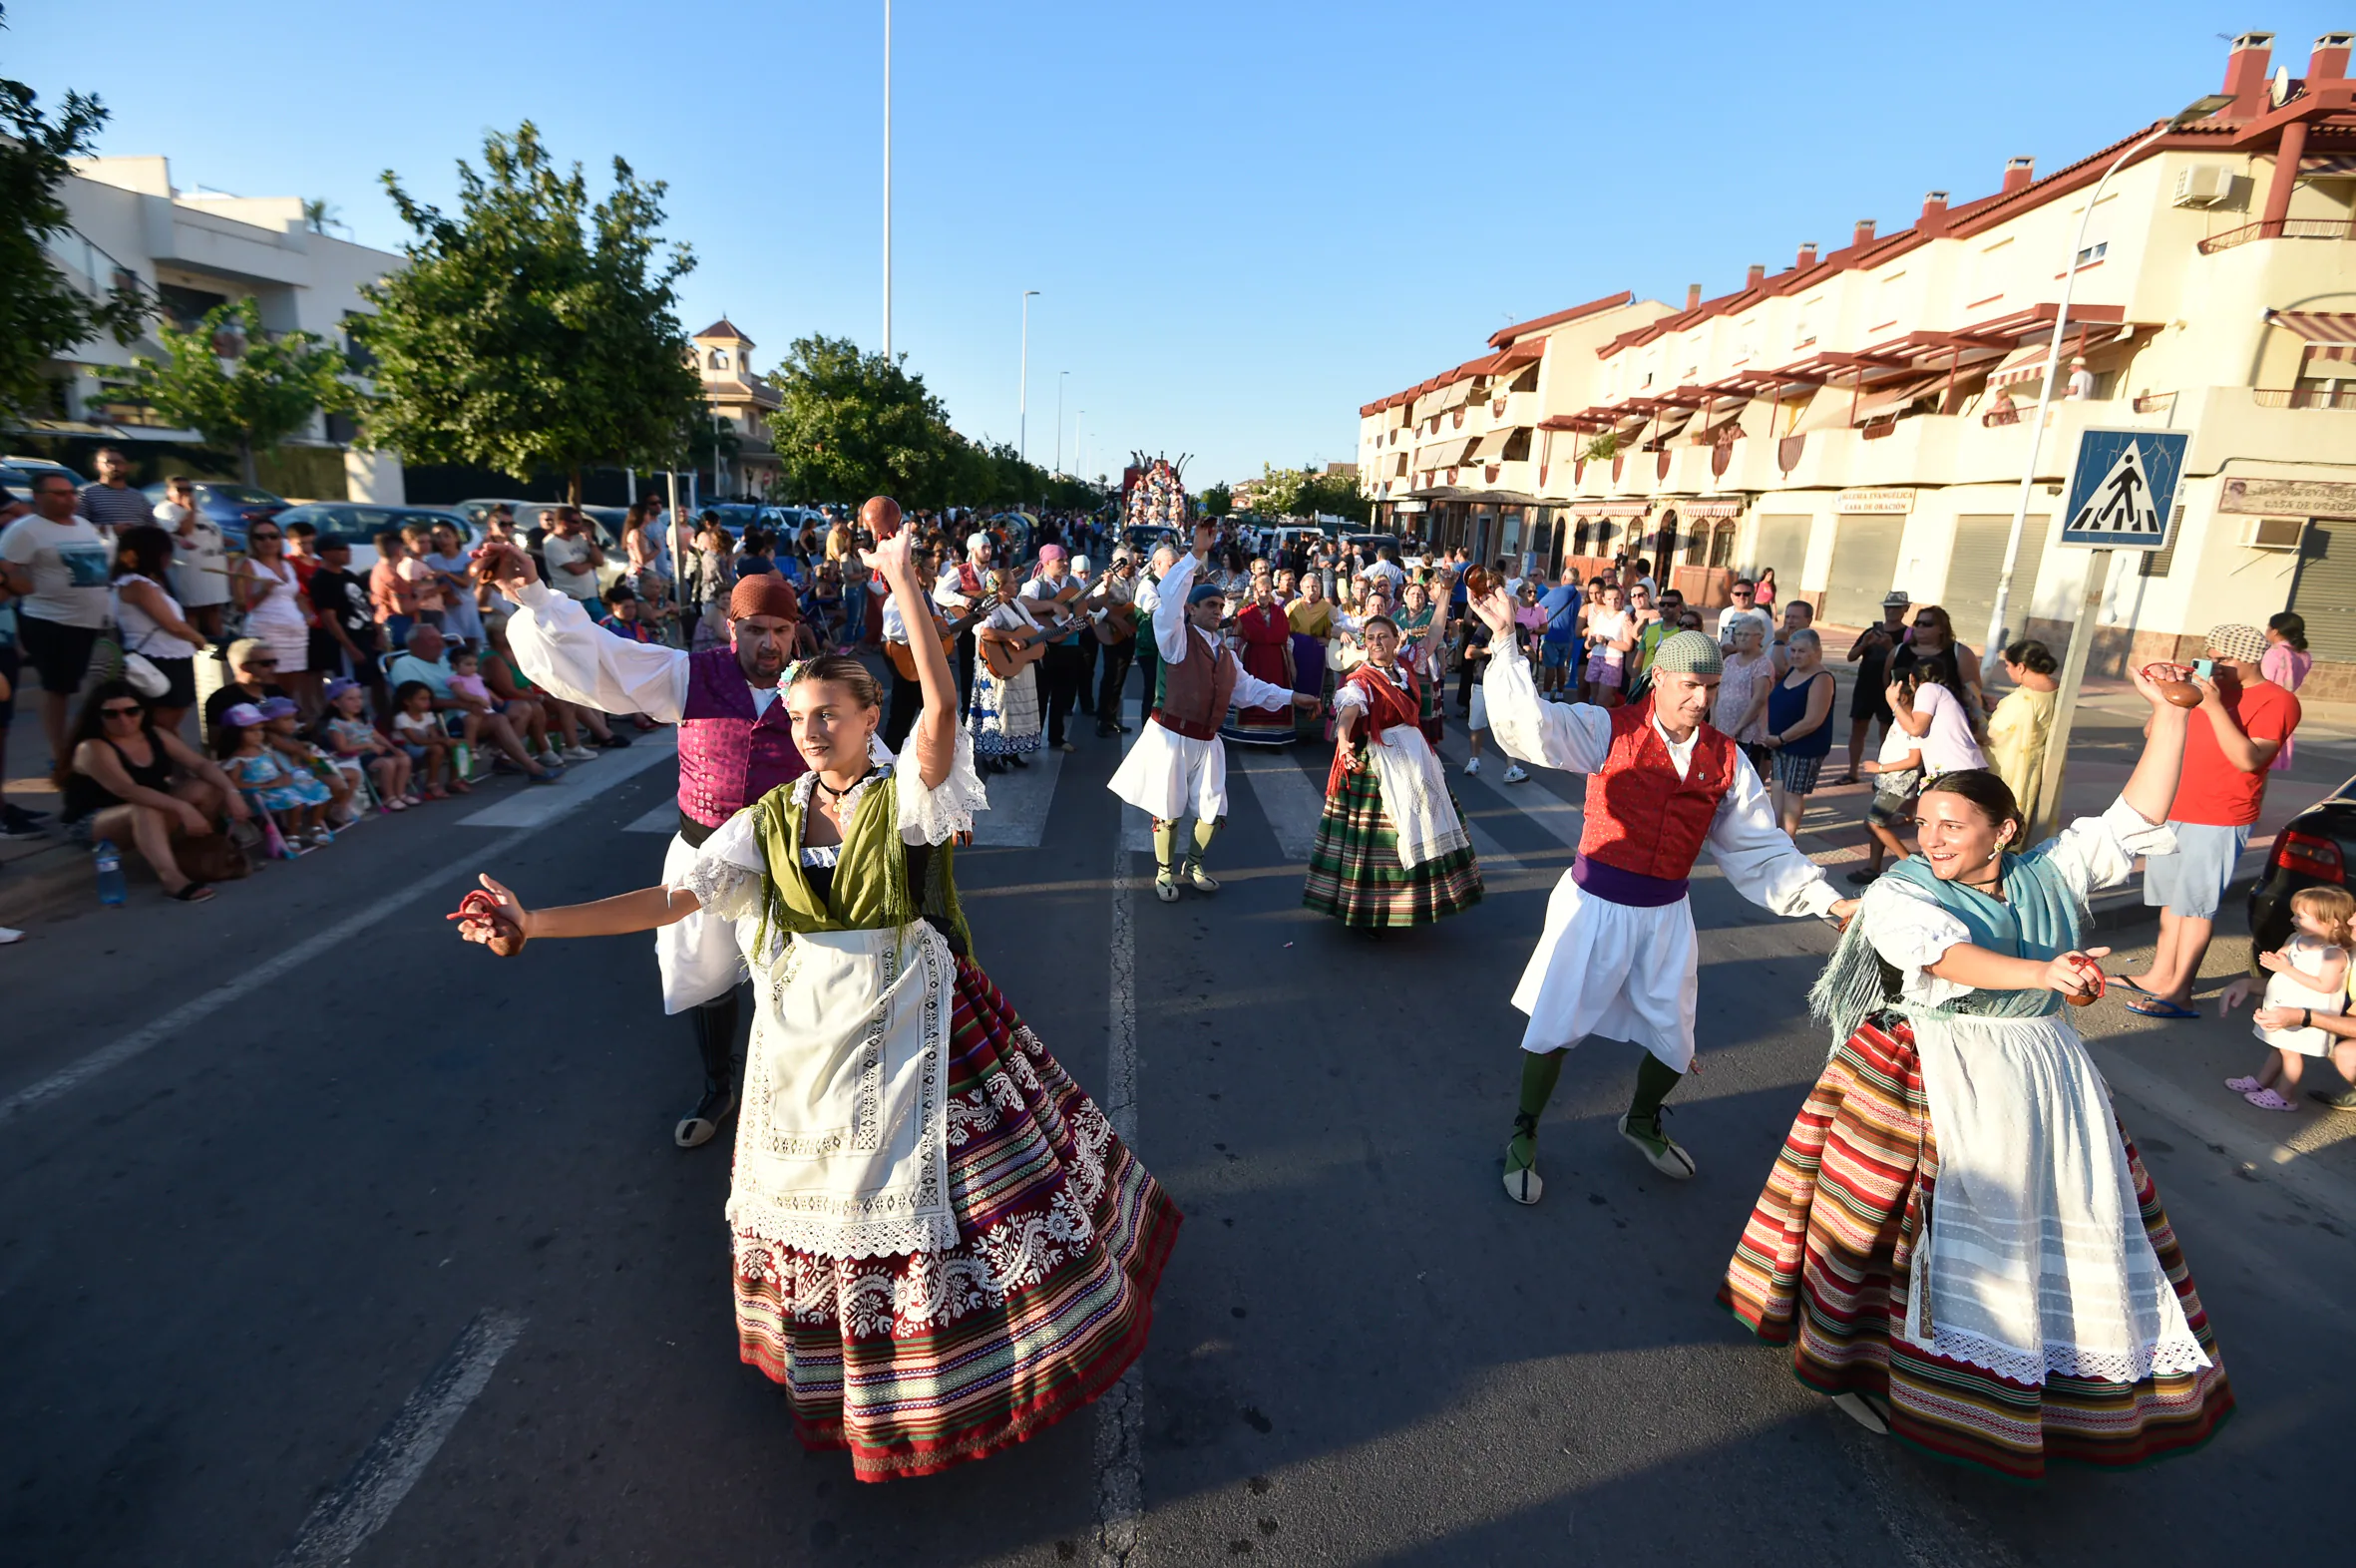 Members of an orchard rock liven up the parade with their folkloric dances.